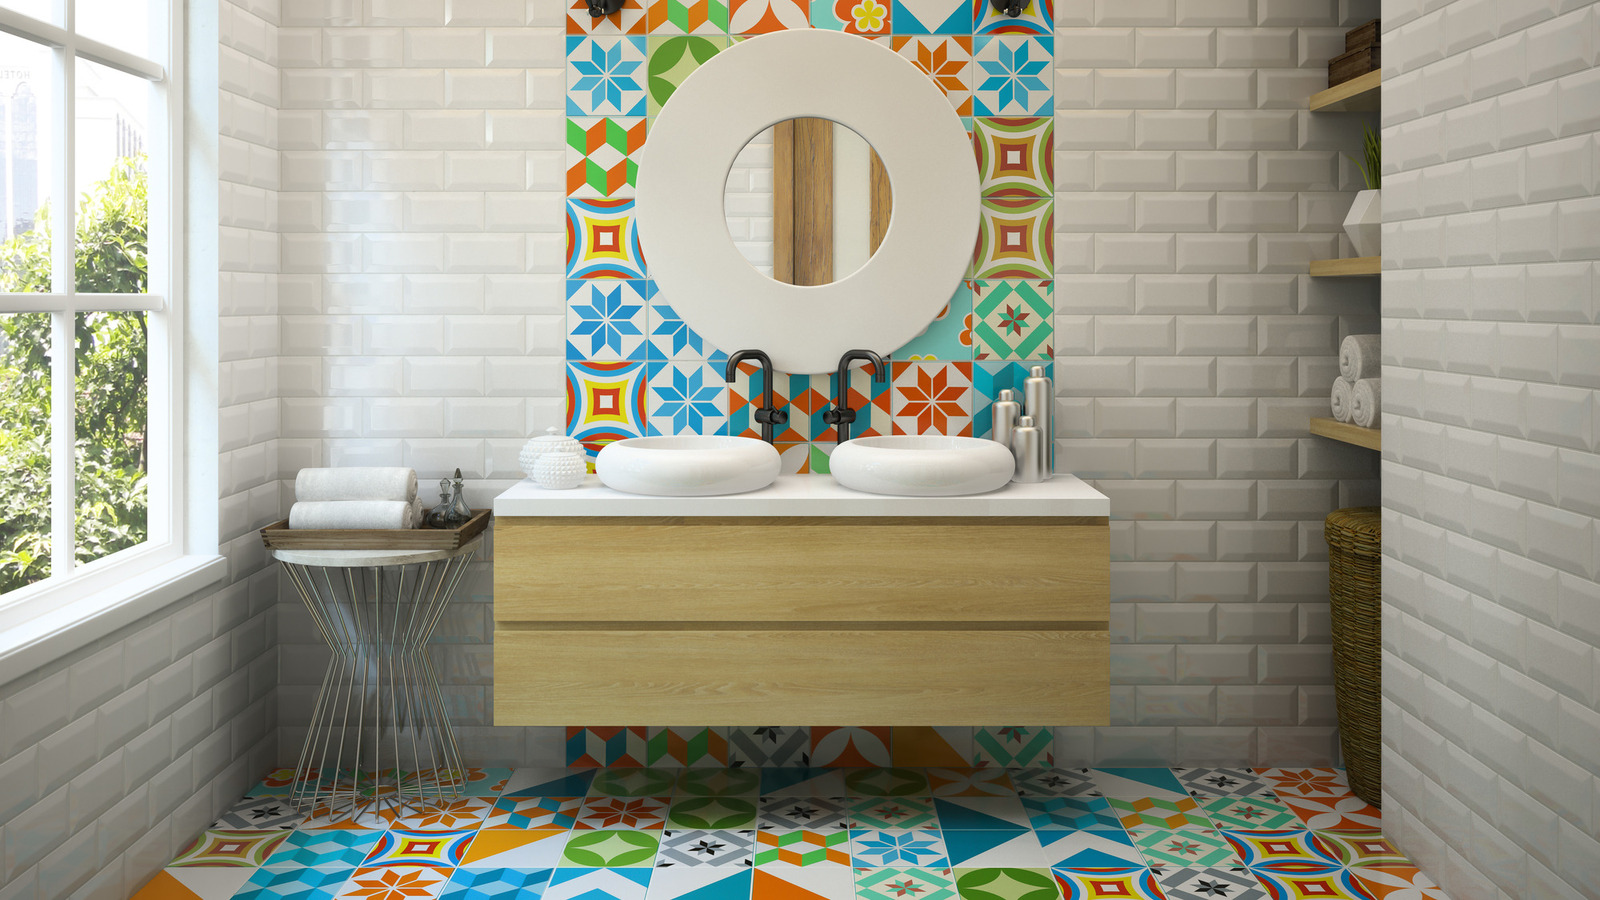 25 Unique Bathroom Tile Designs That Will Make You Want To Do A Remodel